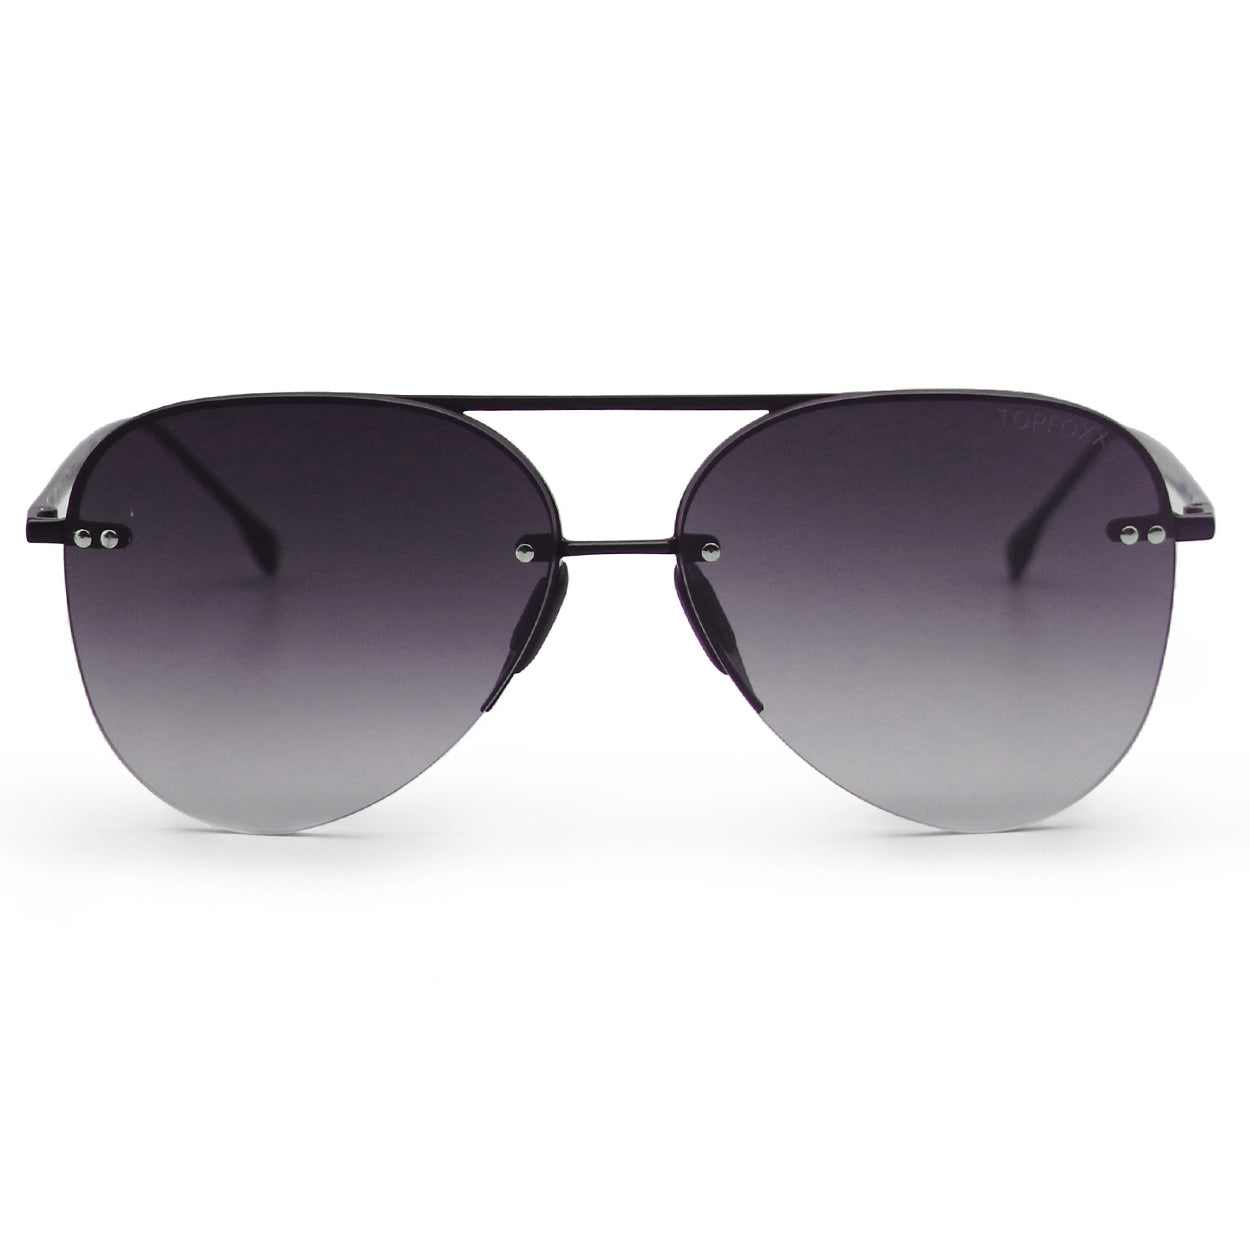 white background picture of classic Aviators with faded black lenses and metal detailing view from front